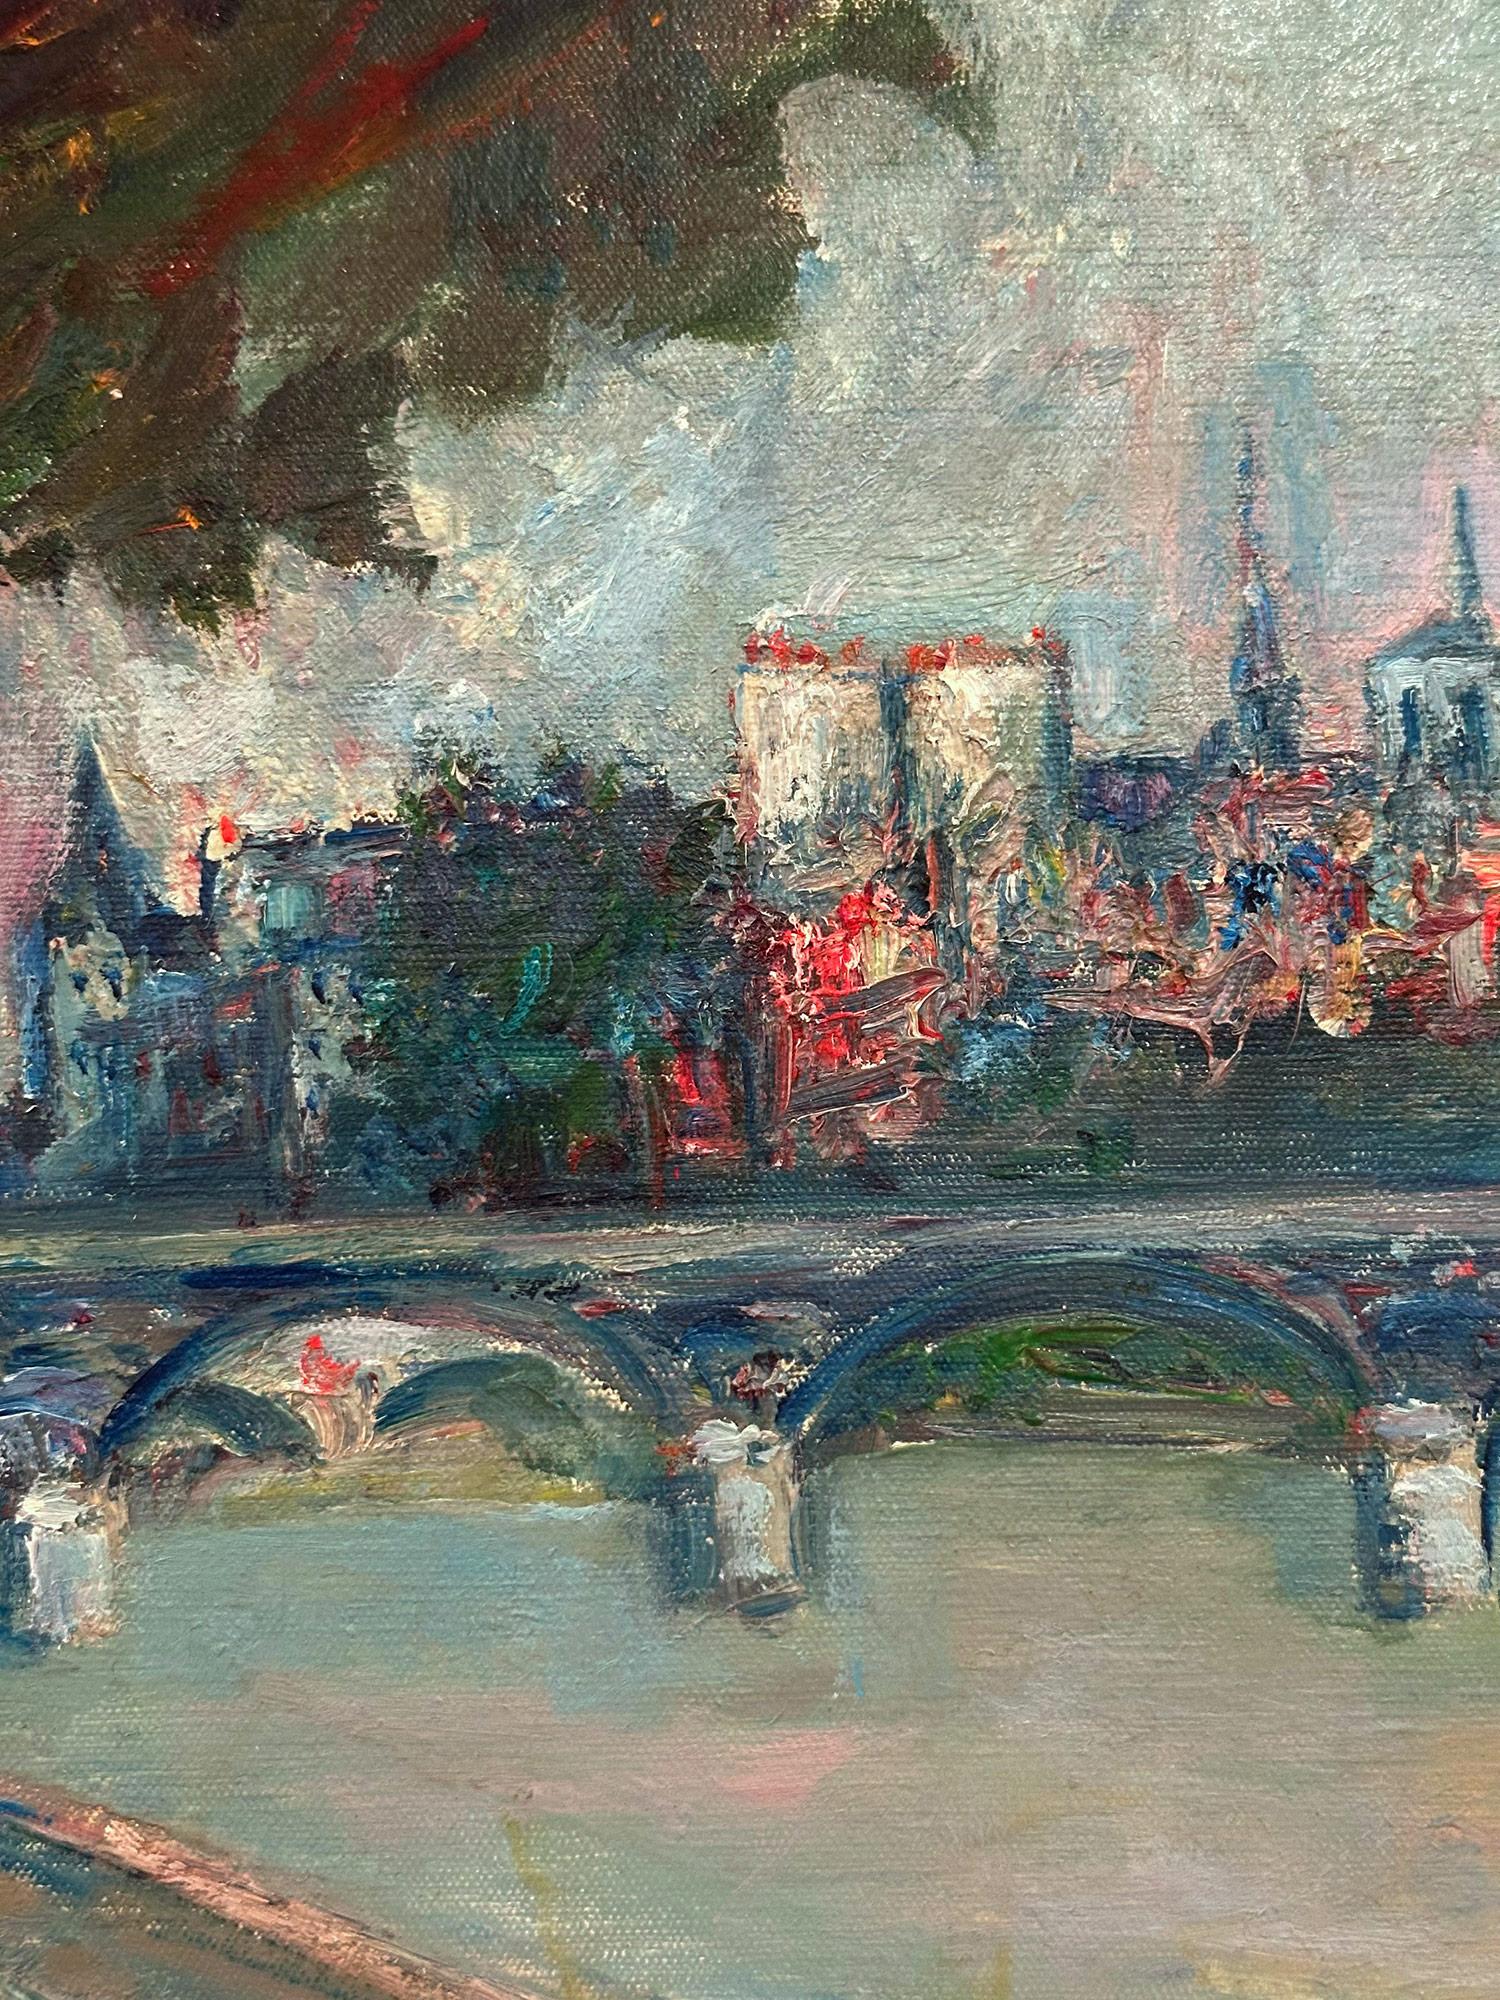 This painting depicts a colorful landscape scene by Pont Neuf with Notre Dam in the distance behind the bridge. The attractive perspective is what makes this painting so interesting and desirable with vibrant brush work and thick use of paint. The